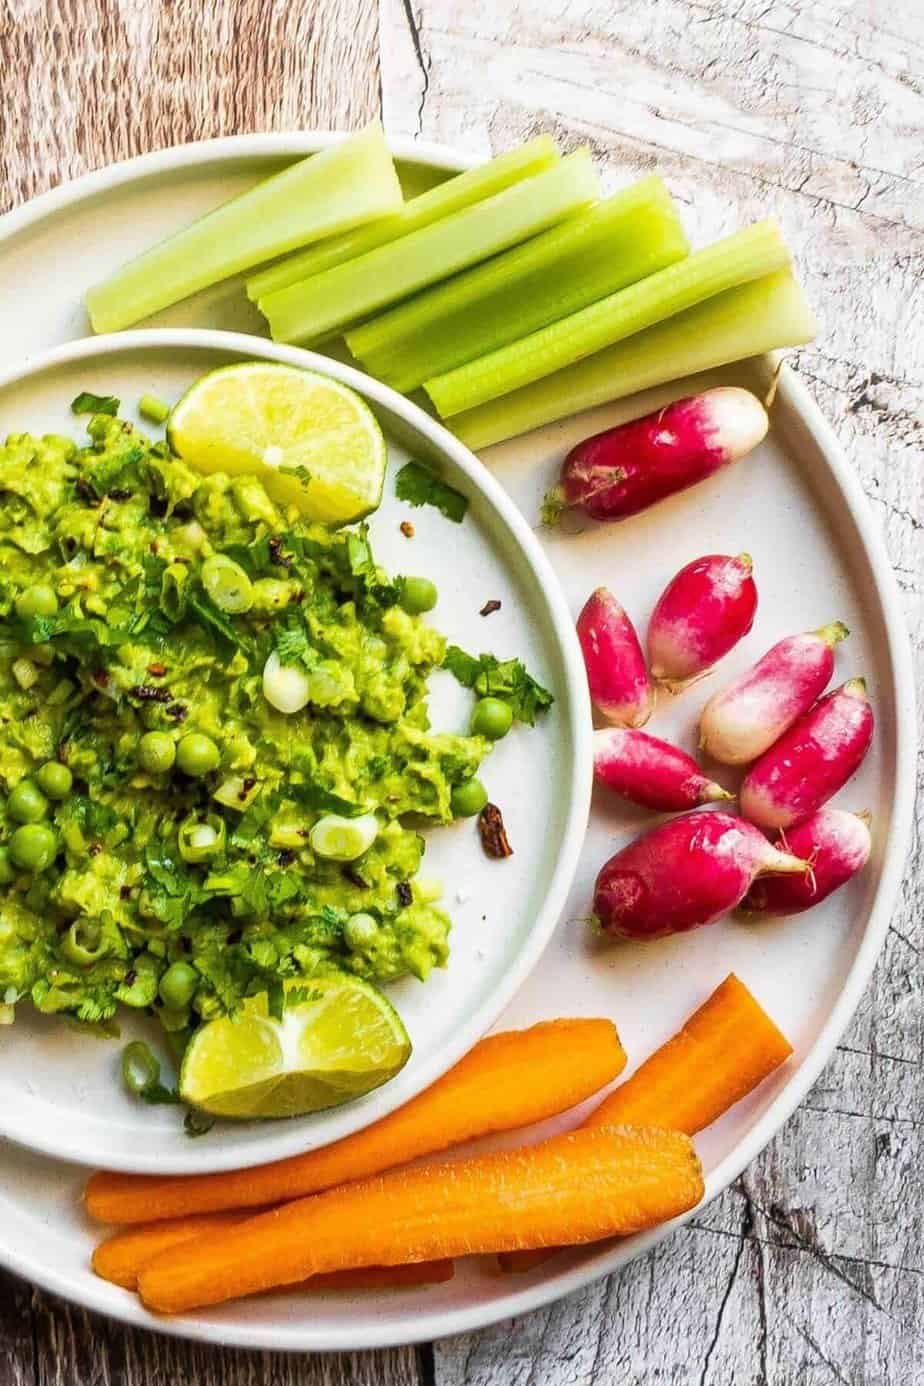 This smashed green pea and avocado smash really brightens up lunches! Great as a spread or a dip. Creamy avocado mixed with the freshest english garden peas, chipotle chilli flakes and lime.